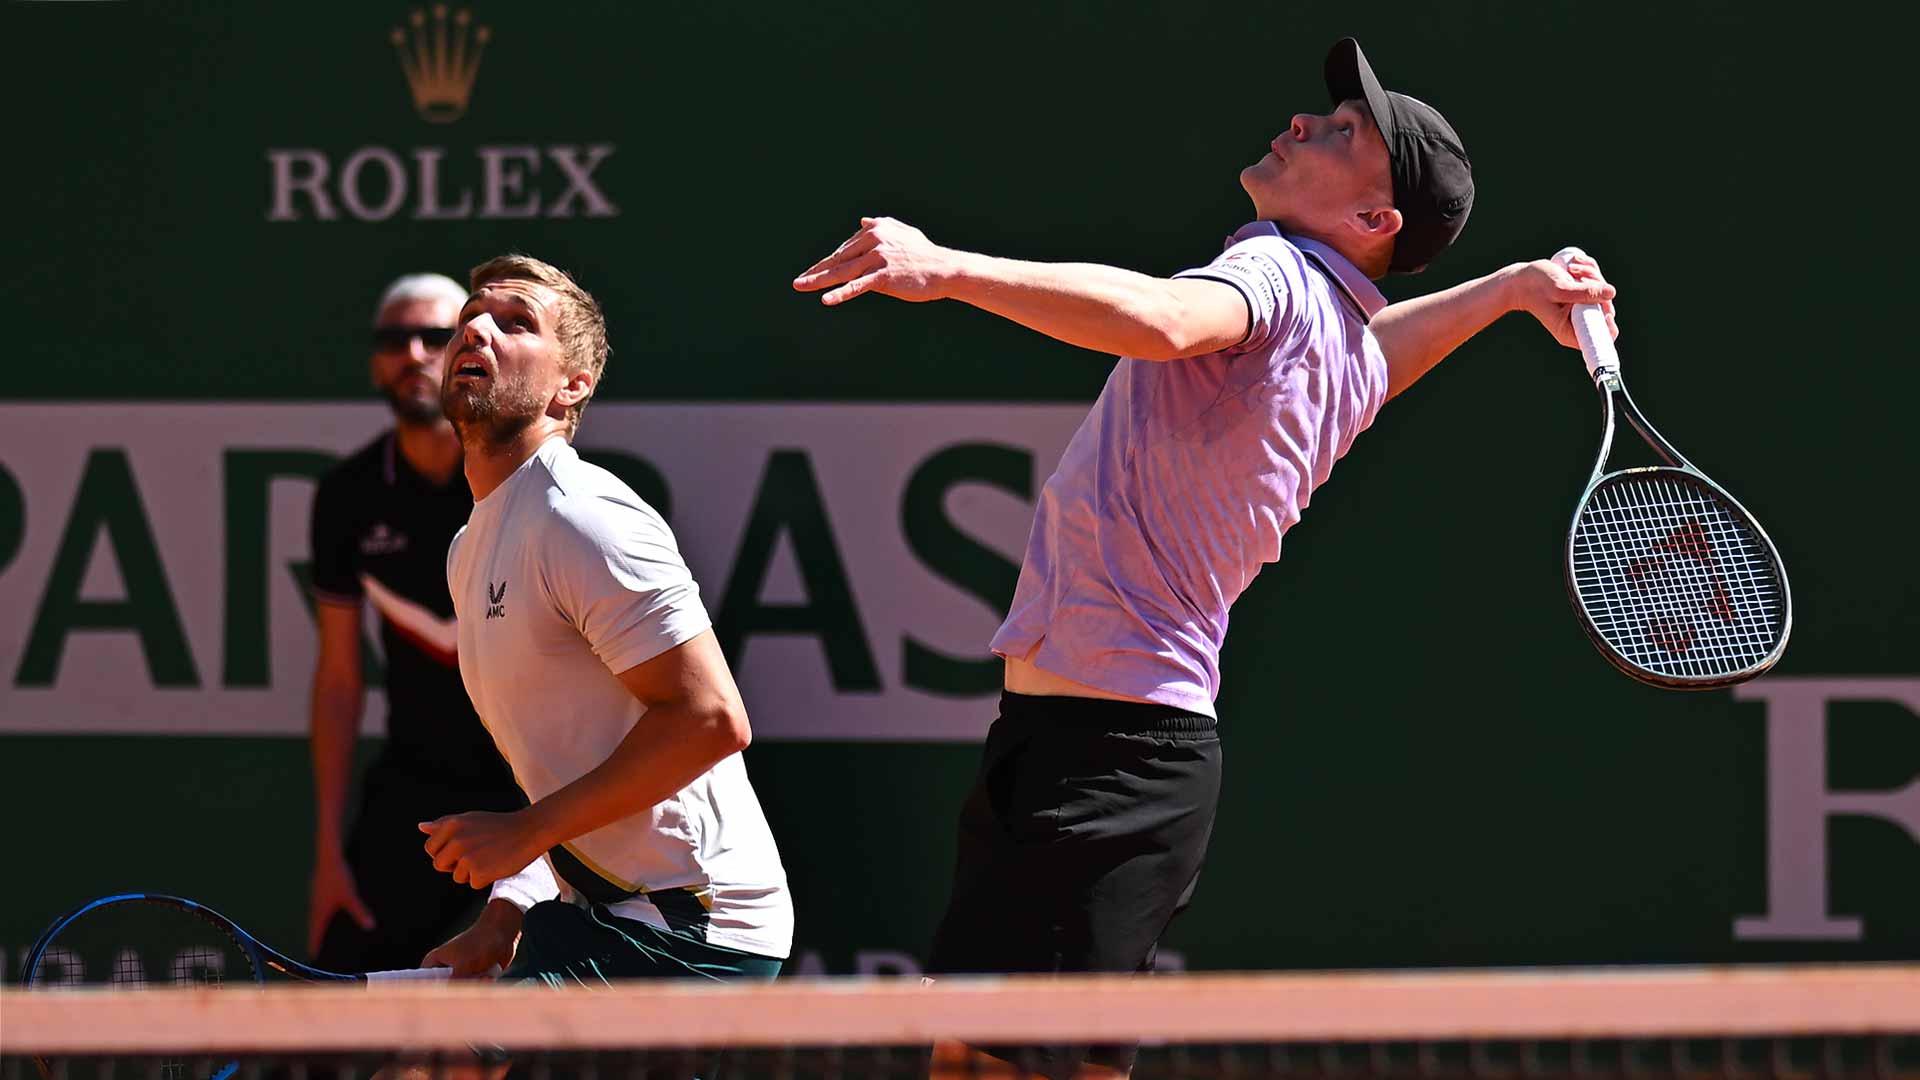 Lloyd Glasspool and Harri Heliovaara hold their nerve on Thursday to reach the quarter-finals at the Rolex Monte-Carlo Masters.